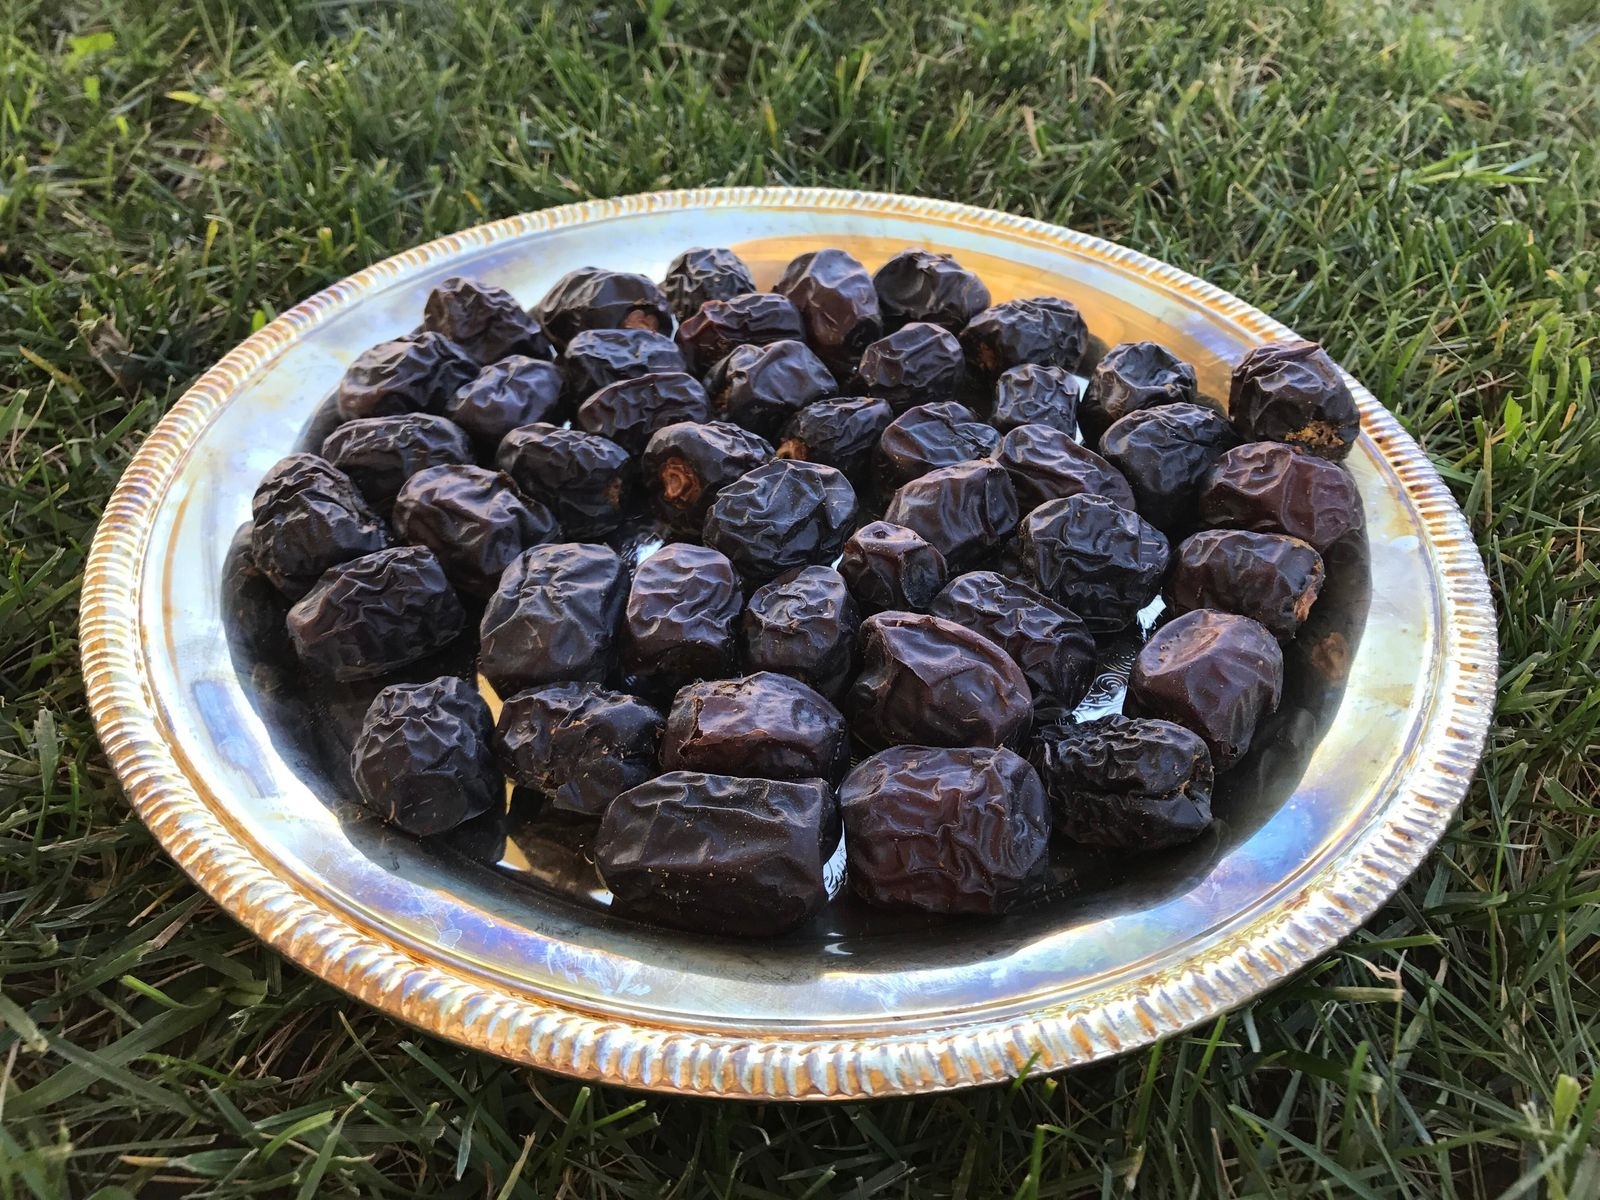 Why The Scrumptious Date Is So Important To The Muslim World